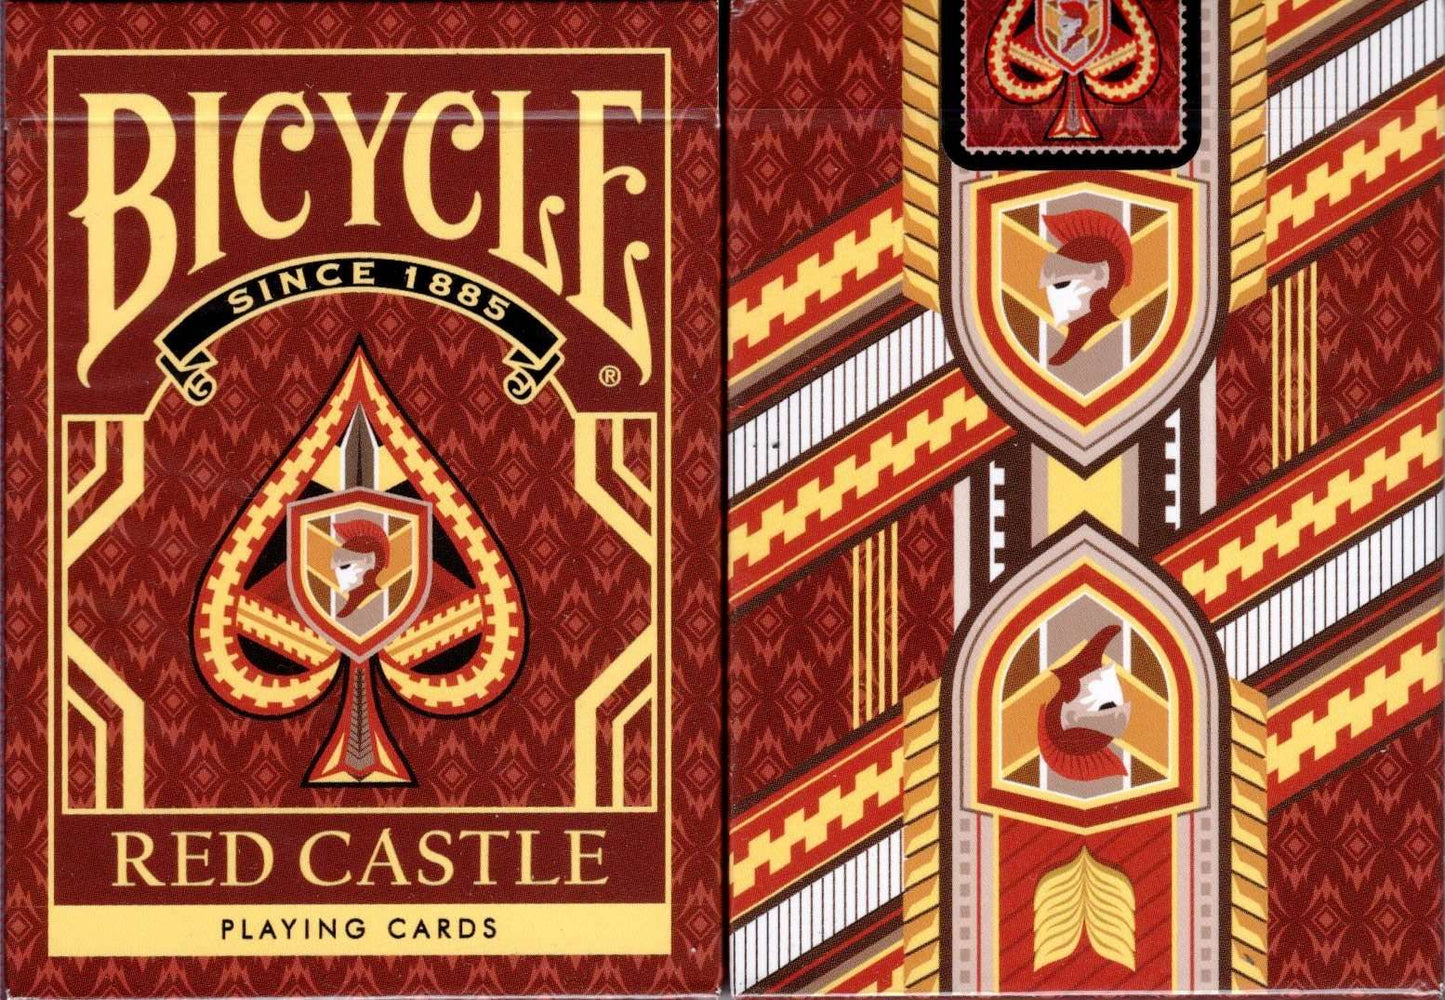 PlayingCardDecks.com-Red Castle Bicycle Playing Cards